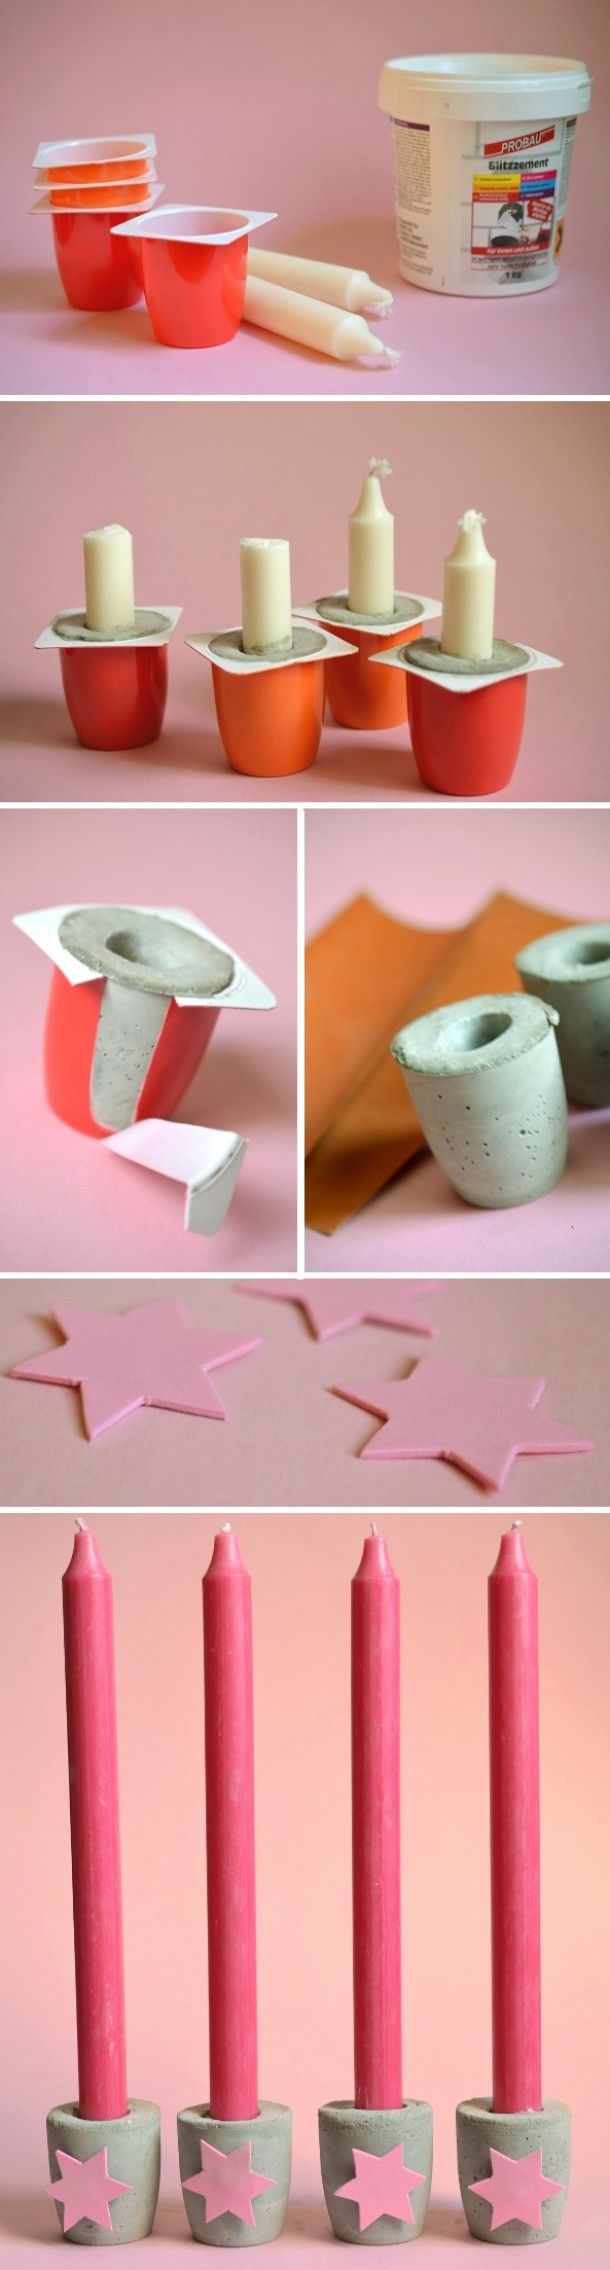 Top 30 DIY Concrete Projects For The Crafty Side Of You_homesthetics.net (21)